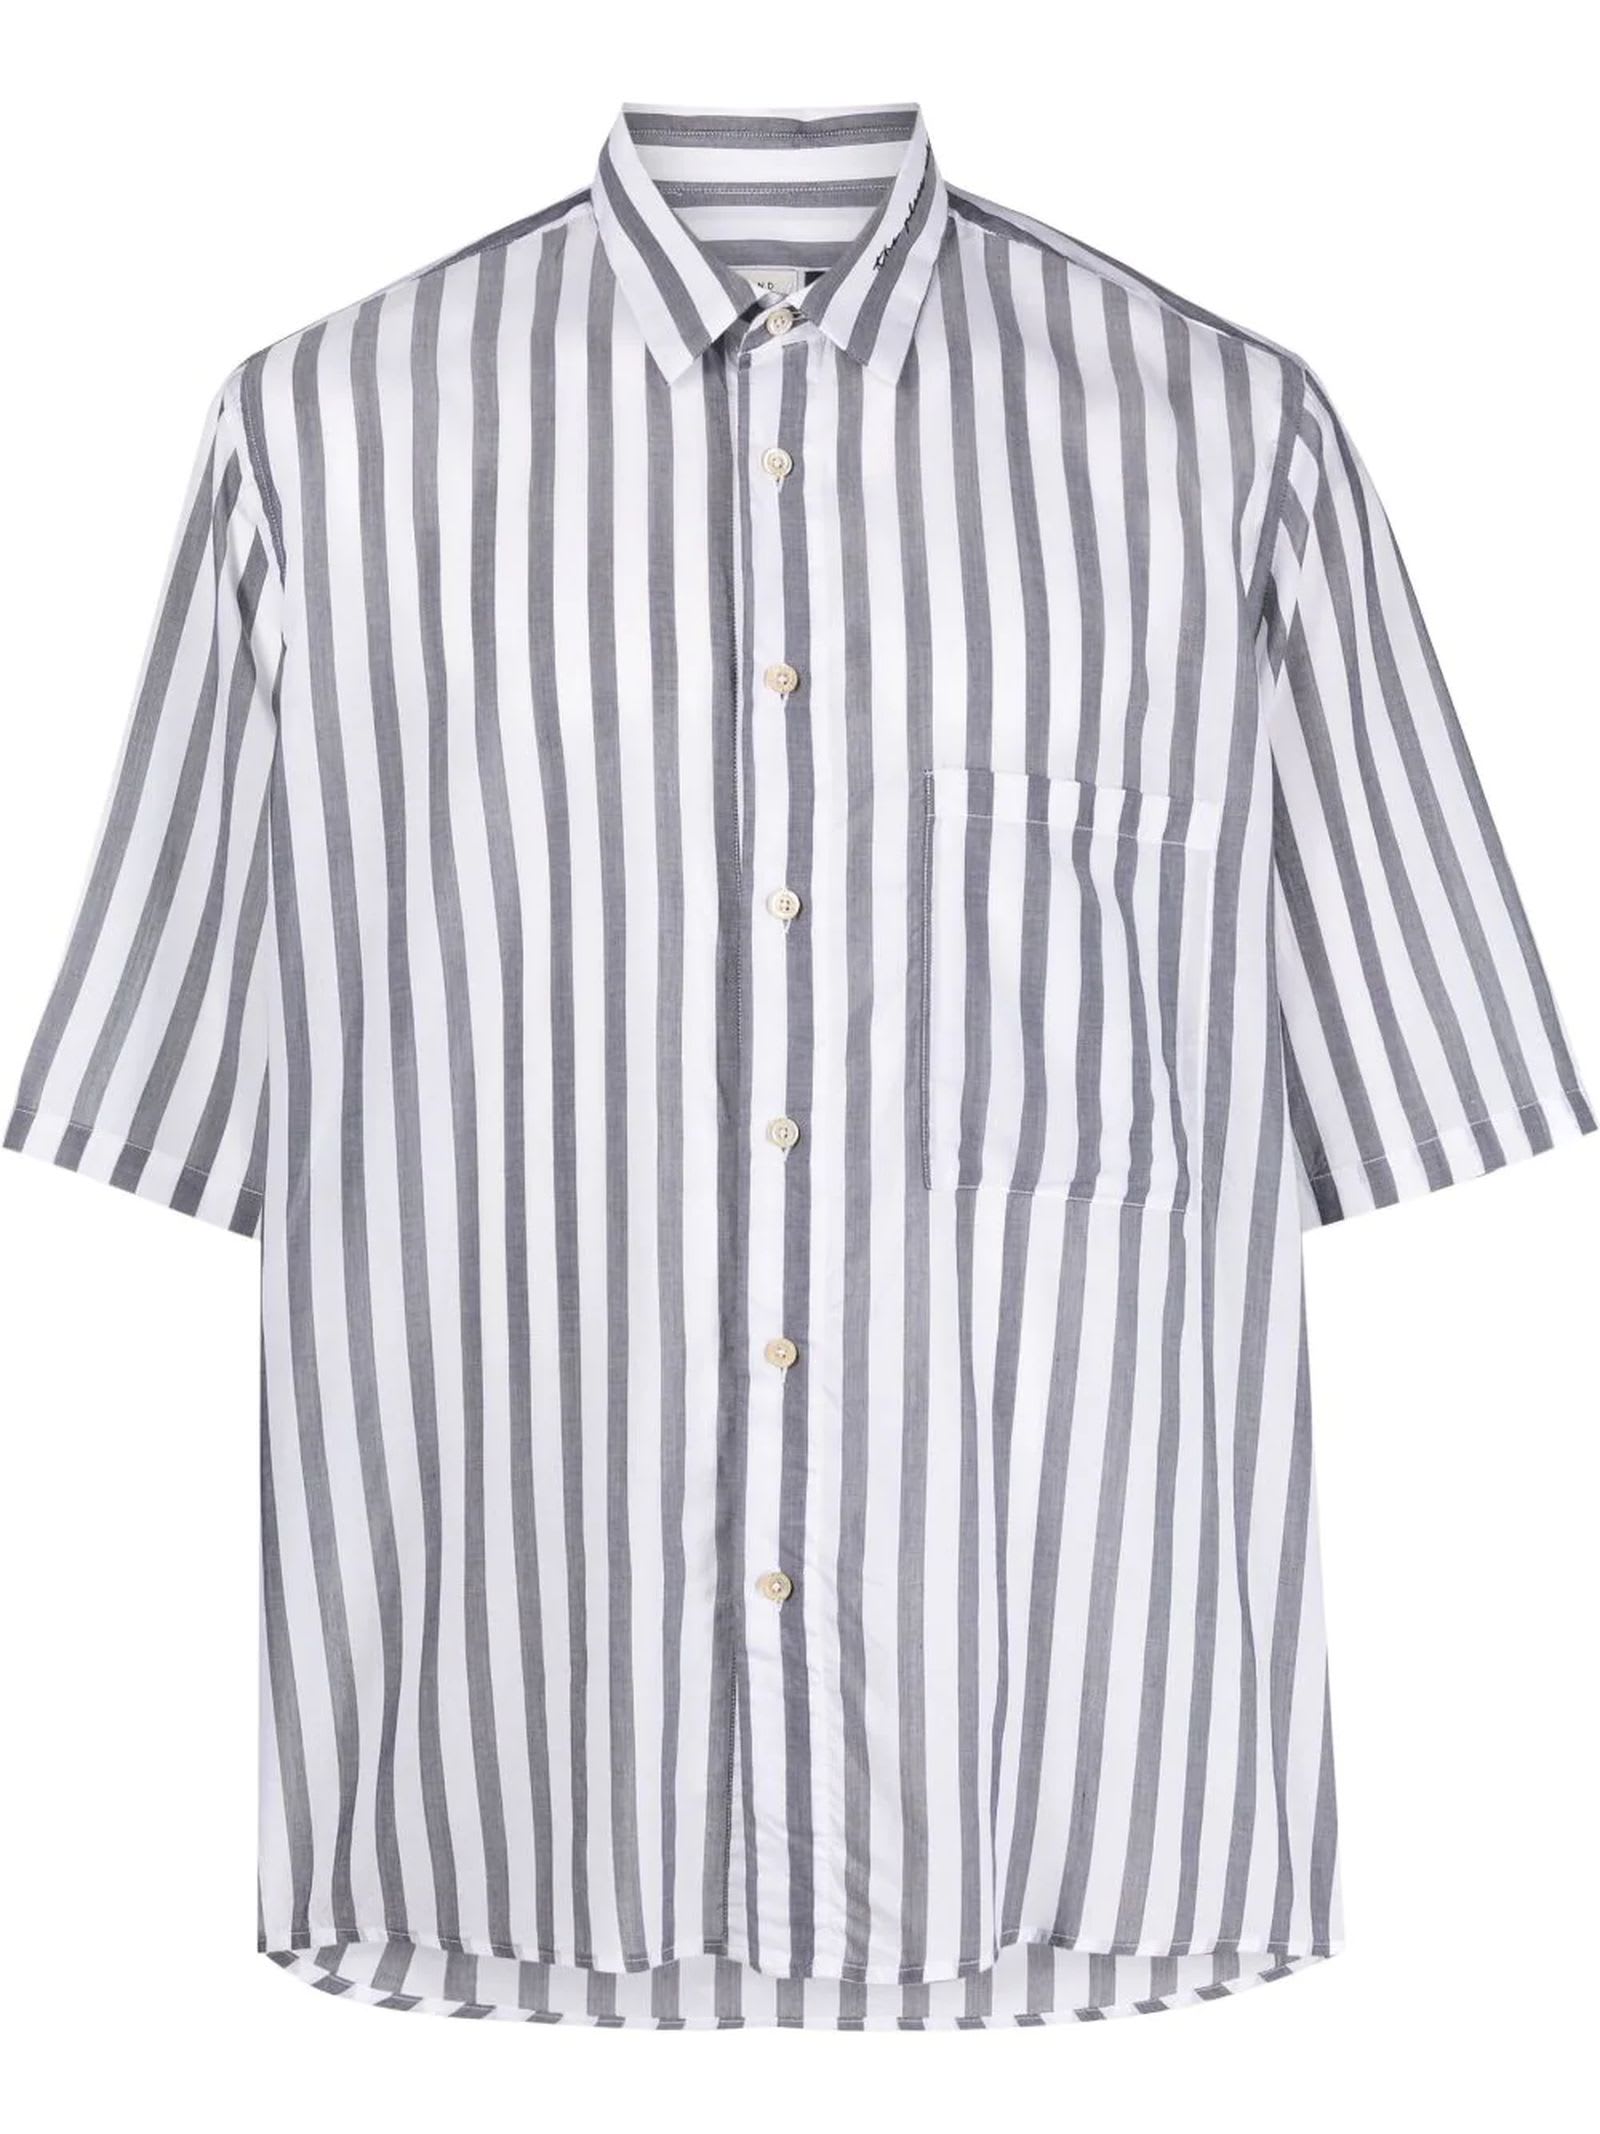 Low Brand Grey And White Striped Shirt